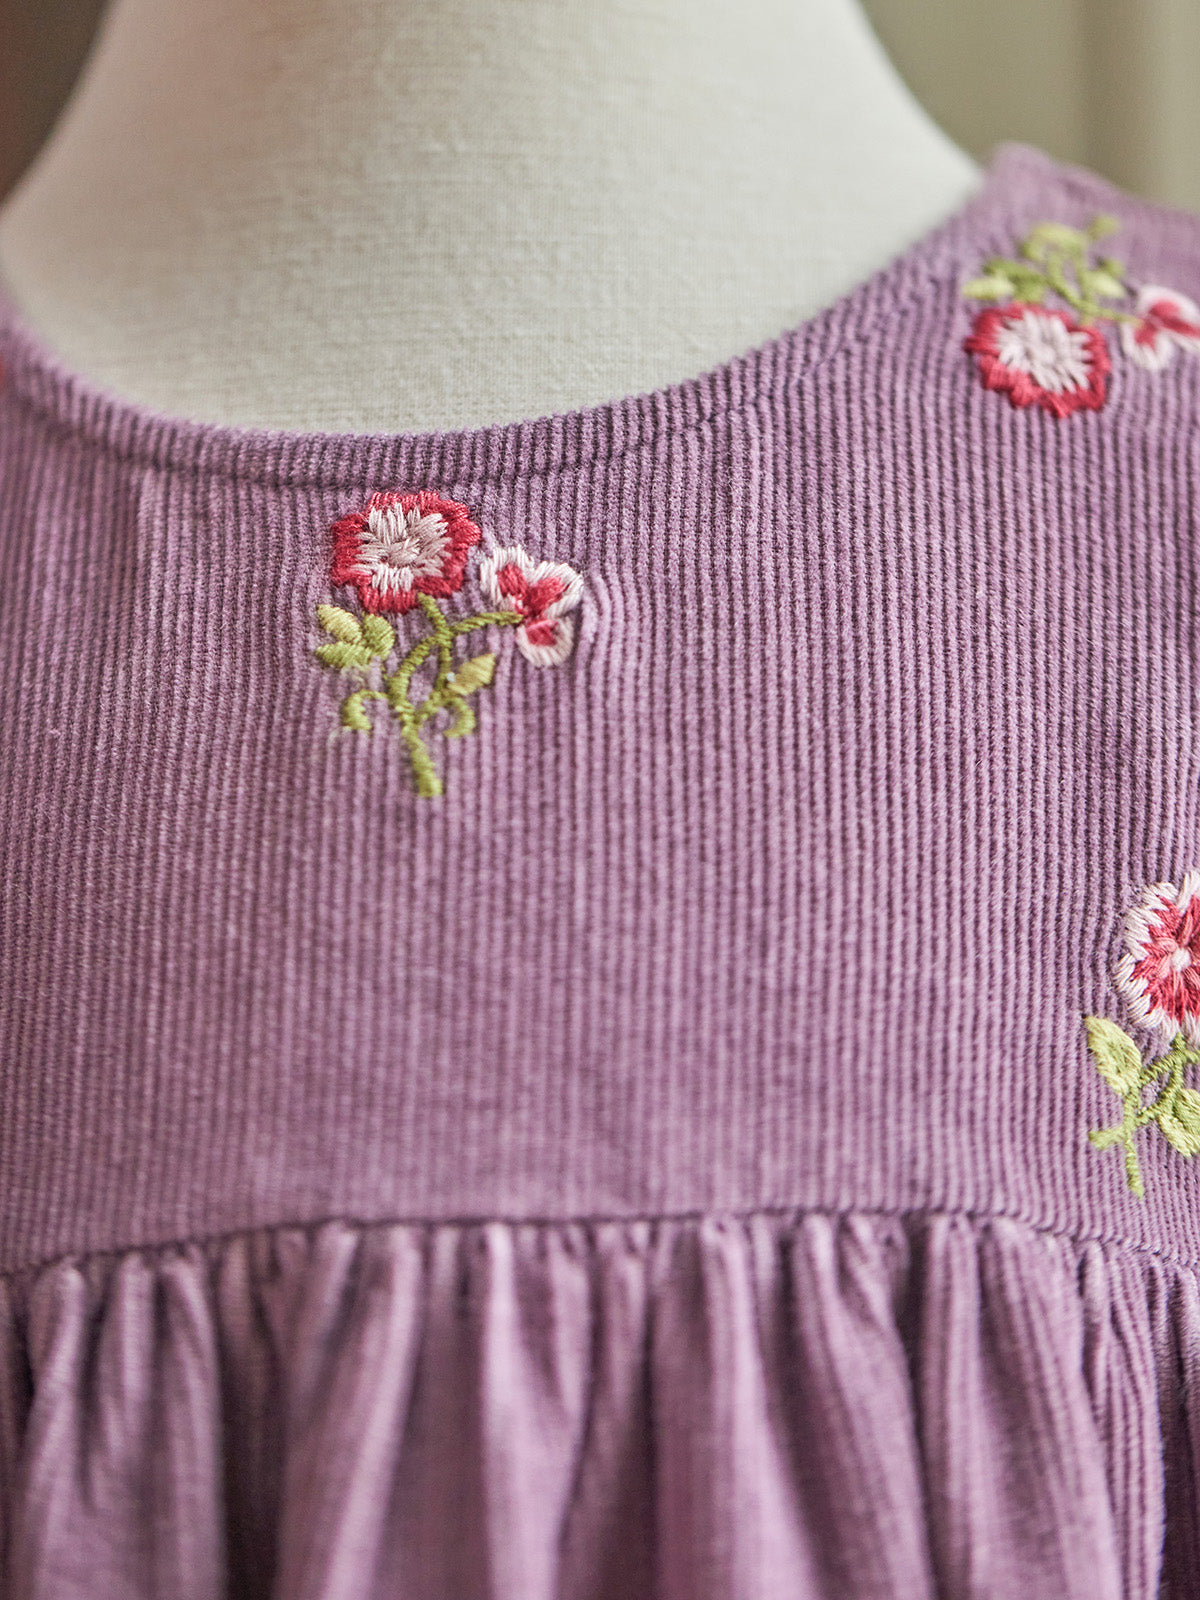 April Cornell Cotton Fiona Baby Dress - Embroidered Corduroy – Twang & Pearl